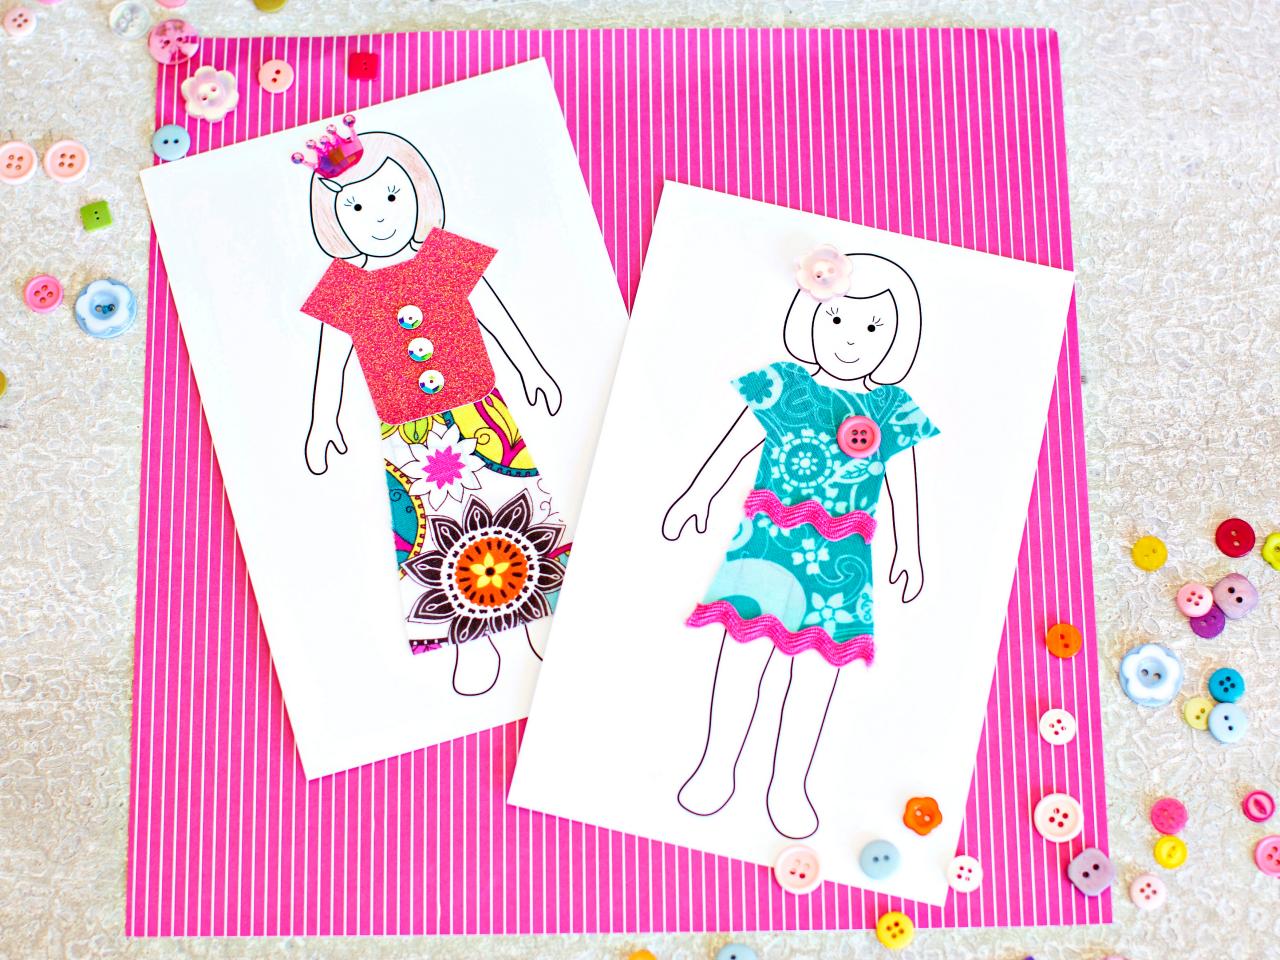 Download How To Make Paper Dolls With Downloadable Patterns How Tos Diy